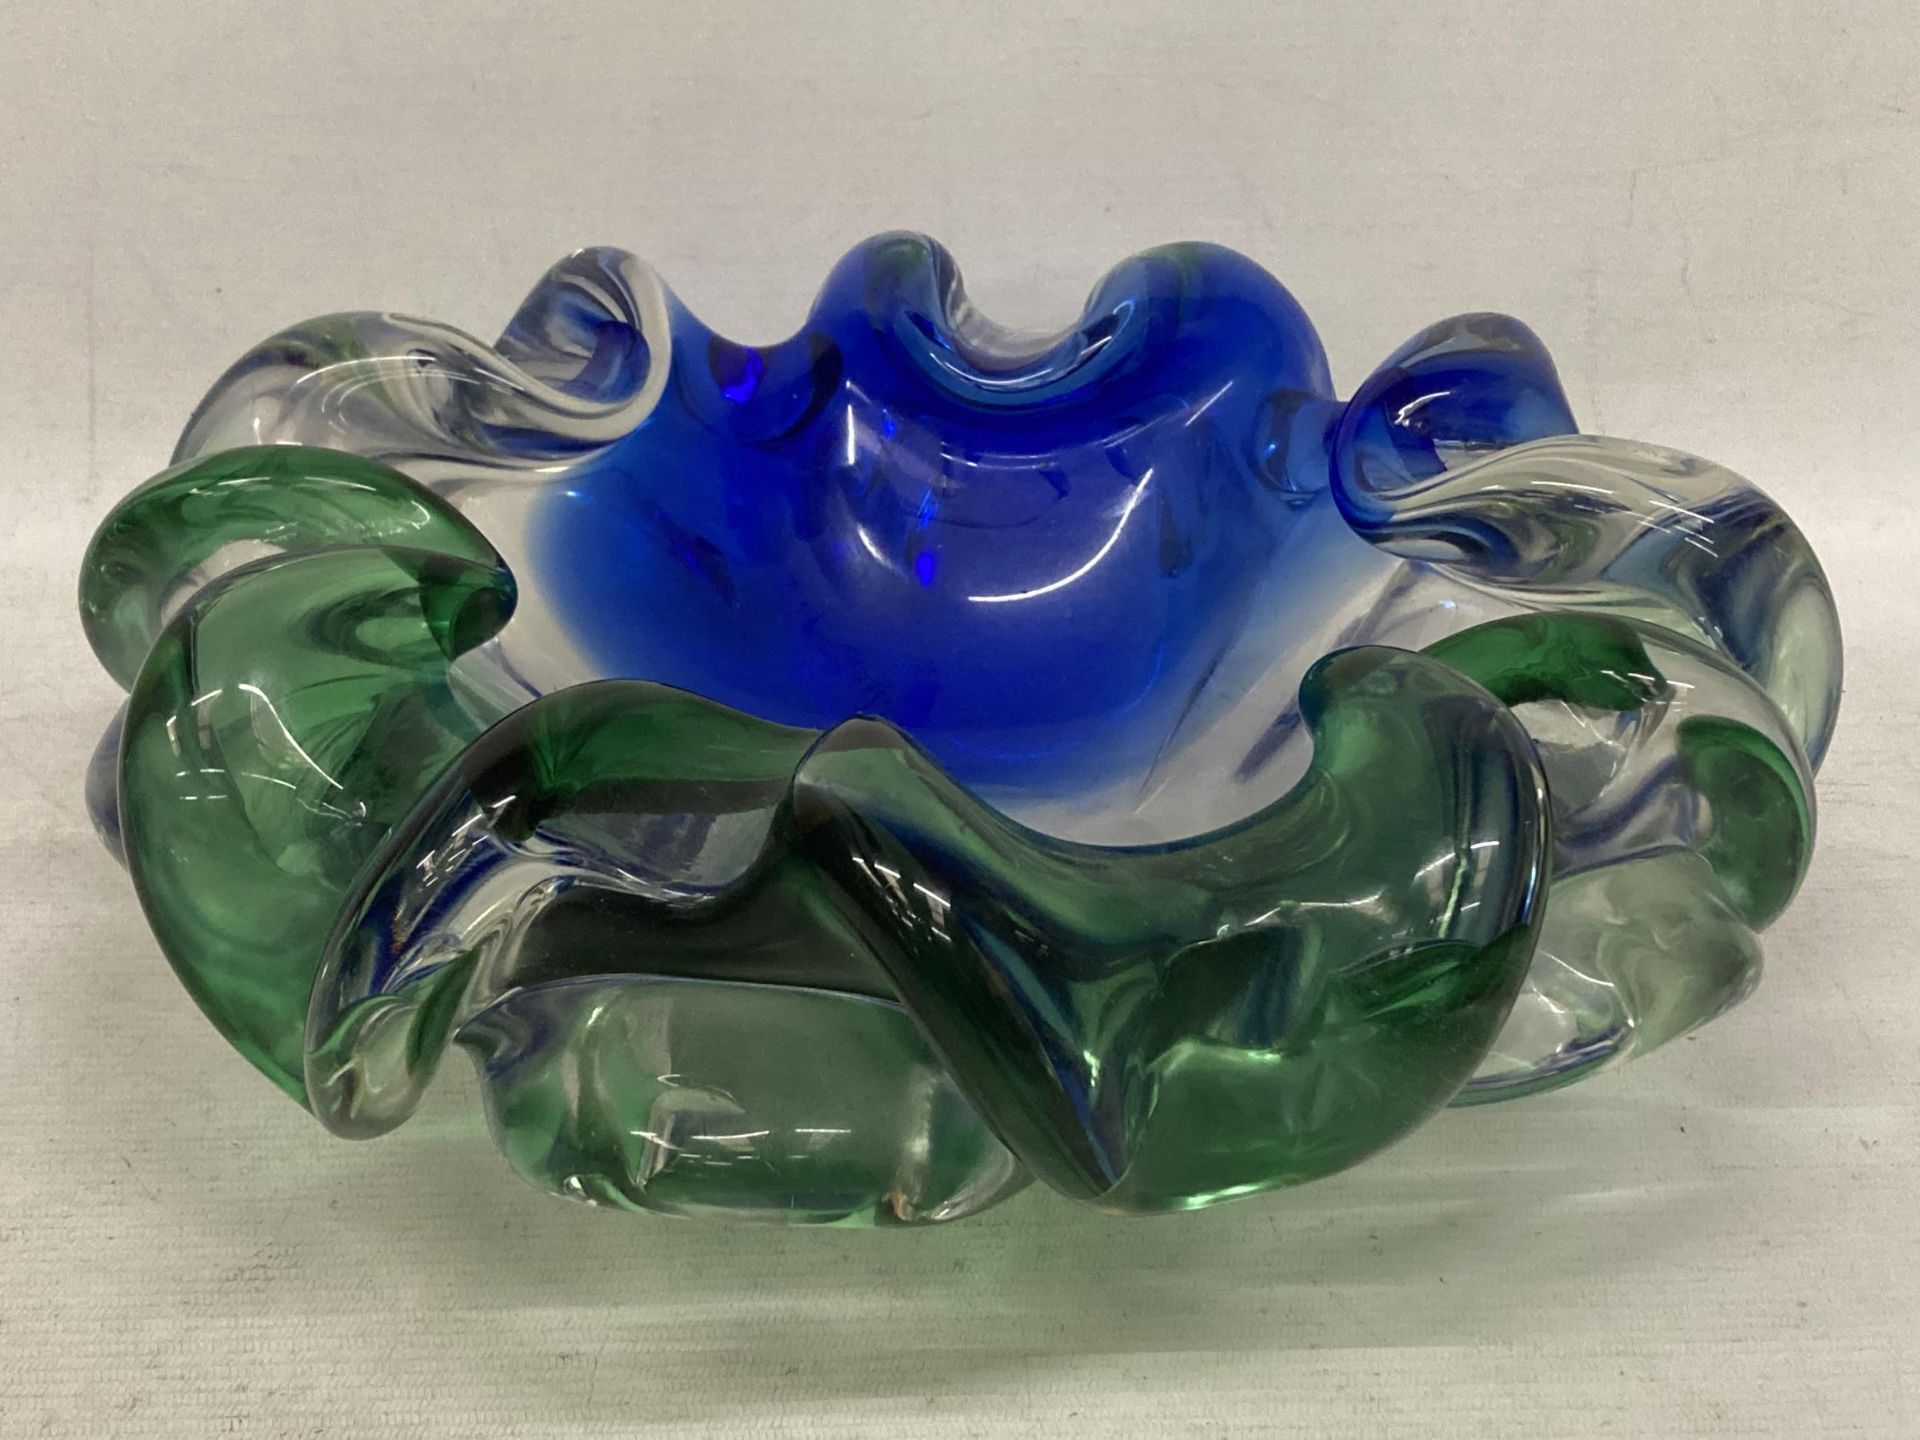 AN ITALIAN BLUE AND GREEN ART GLASS BOWL, POSSIBLY MURANO - Image 2 of 5